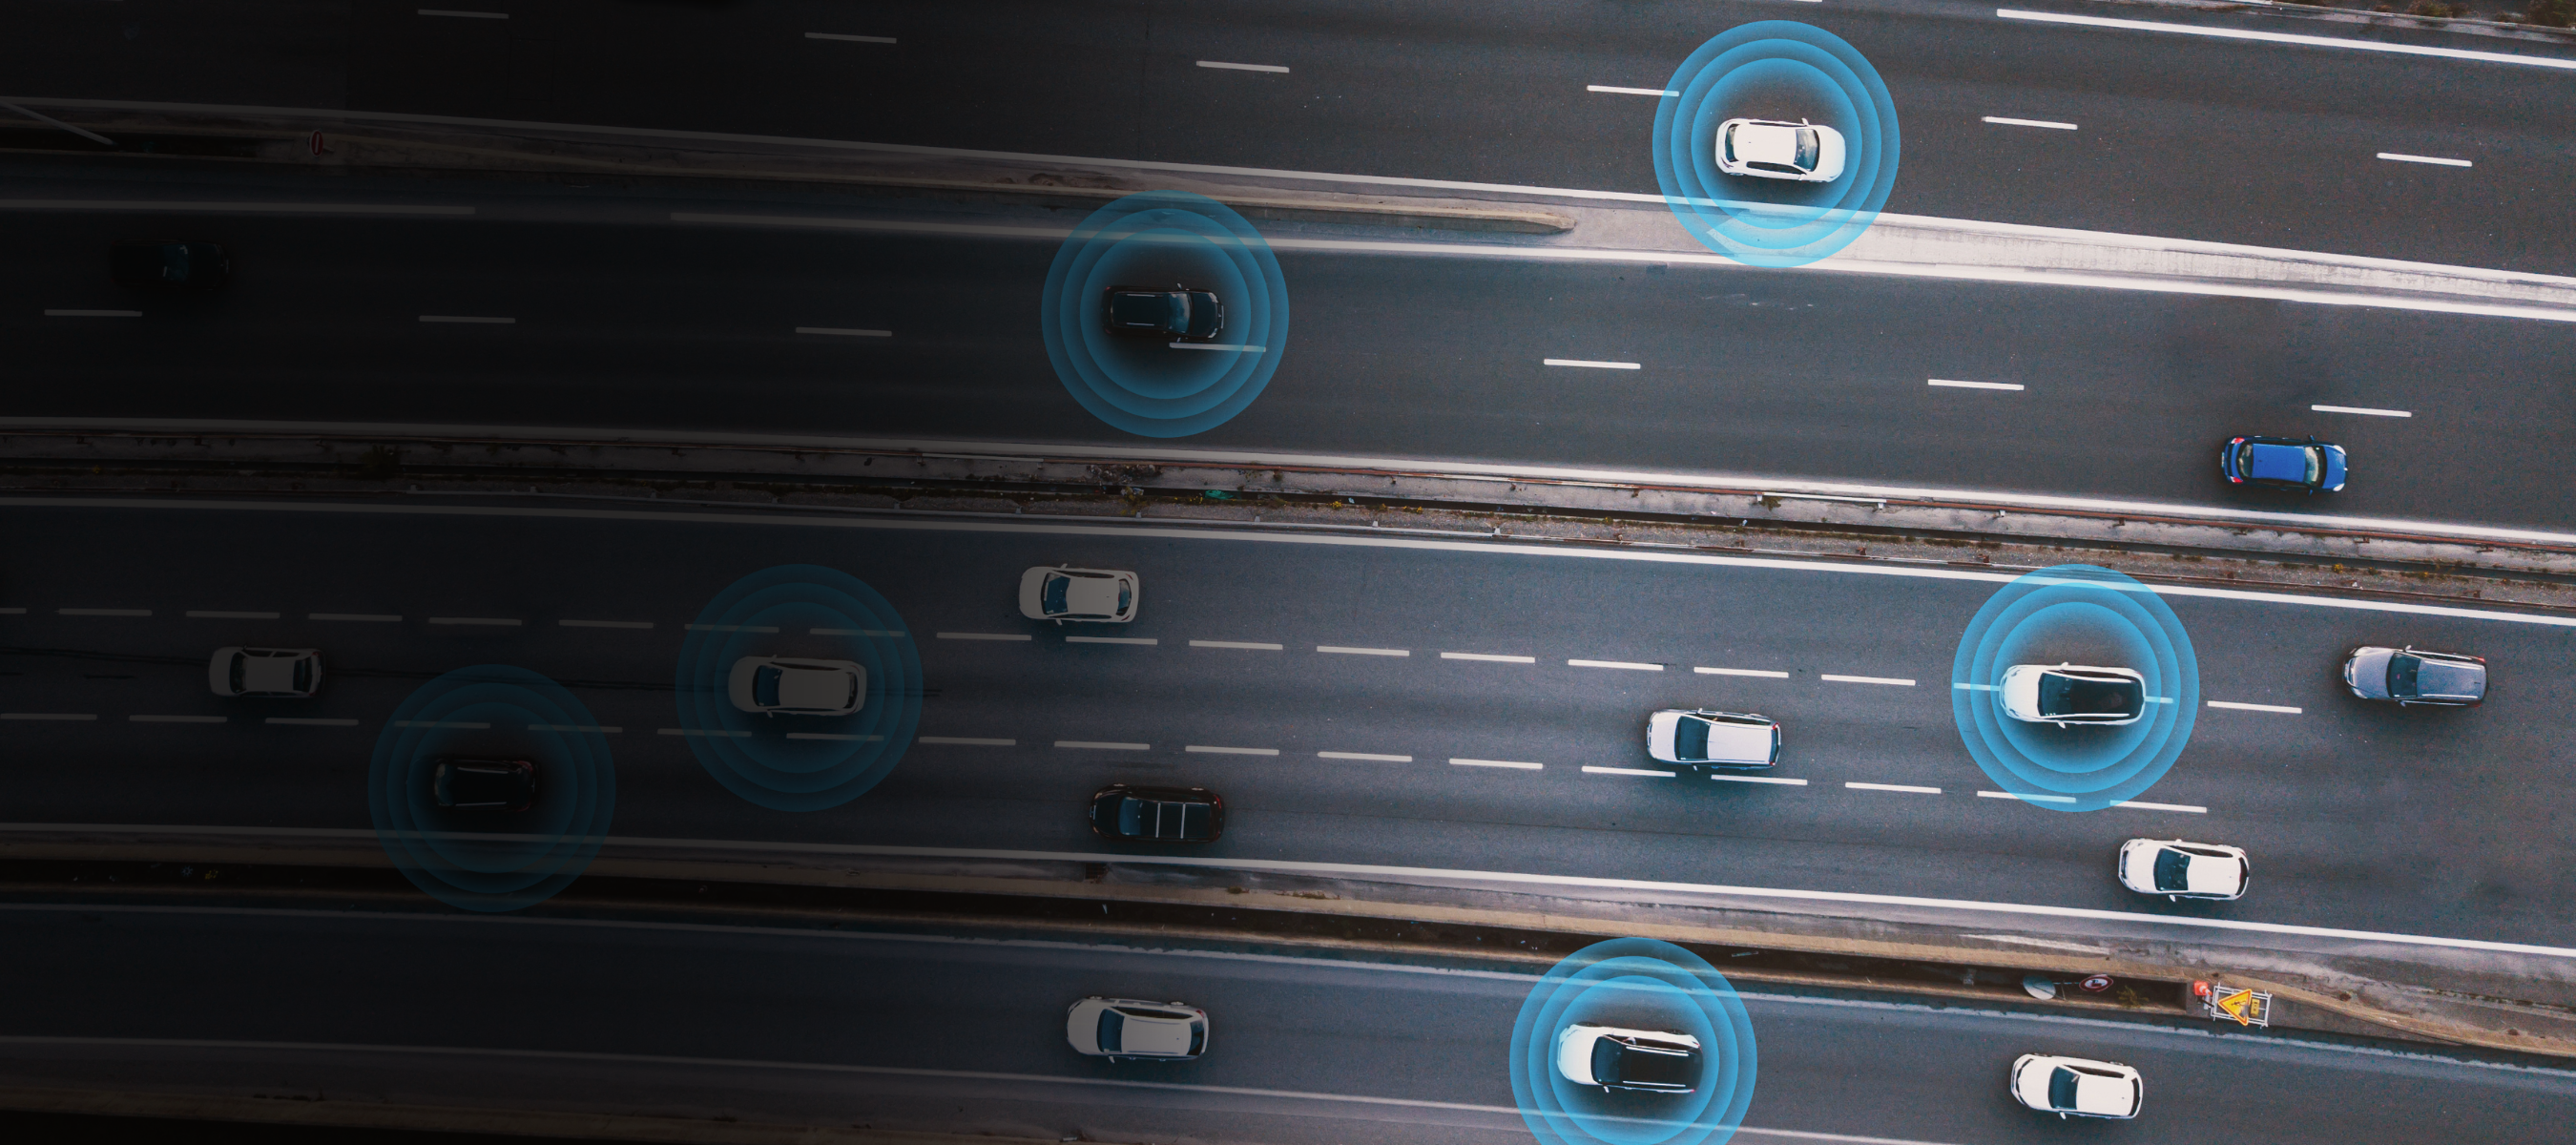 Cars on the road connected to the internet with blue signals showing their connectivity